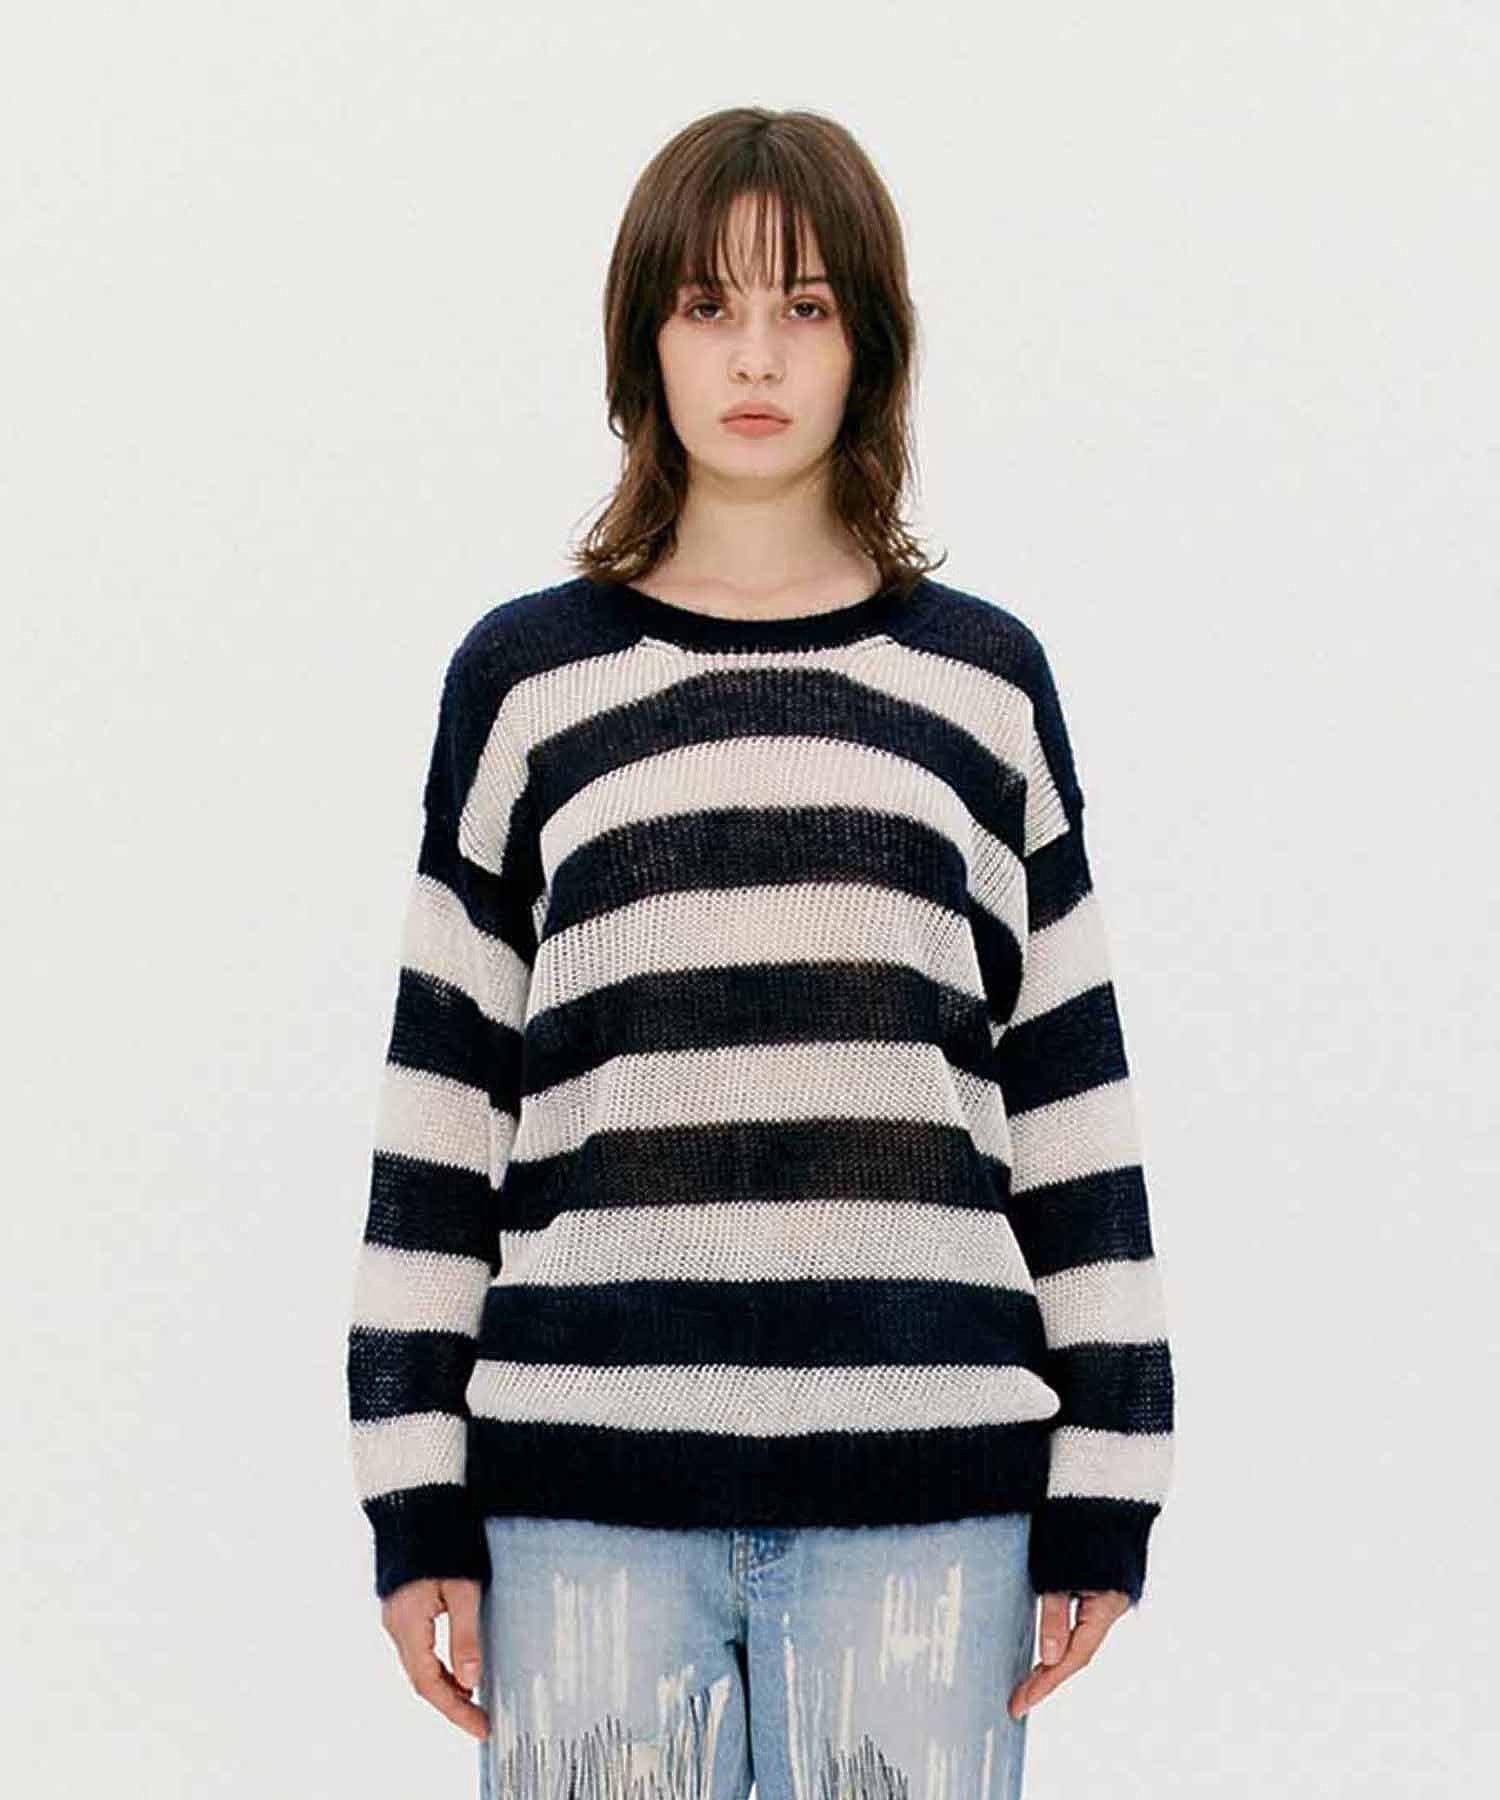 TheOpen Product/ザオープンプロダクト/  MOHAIR STRIPE SWEATER GTO221KT003